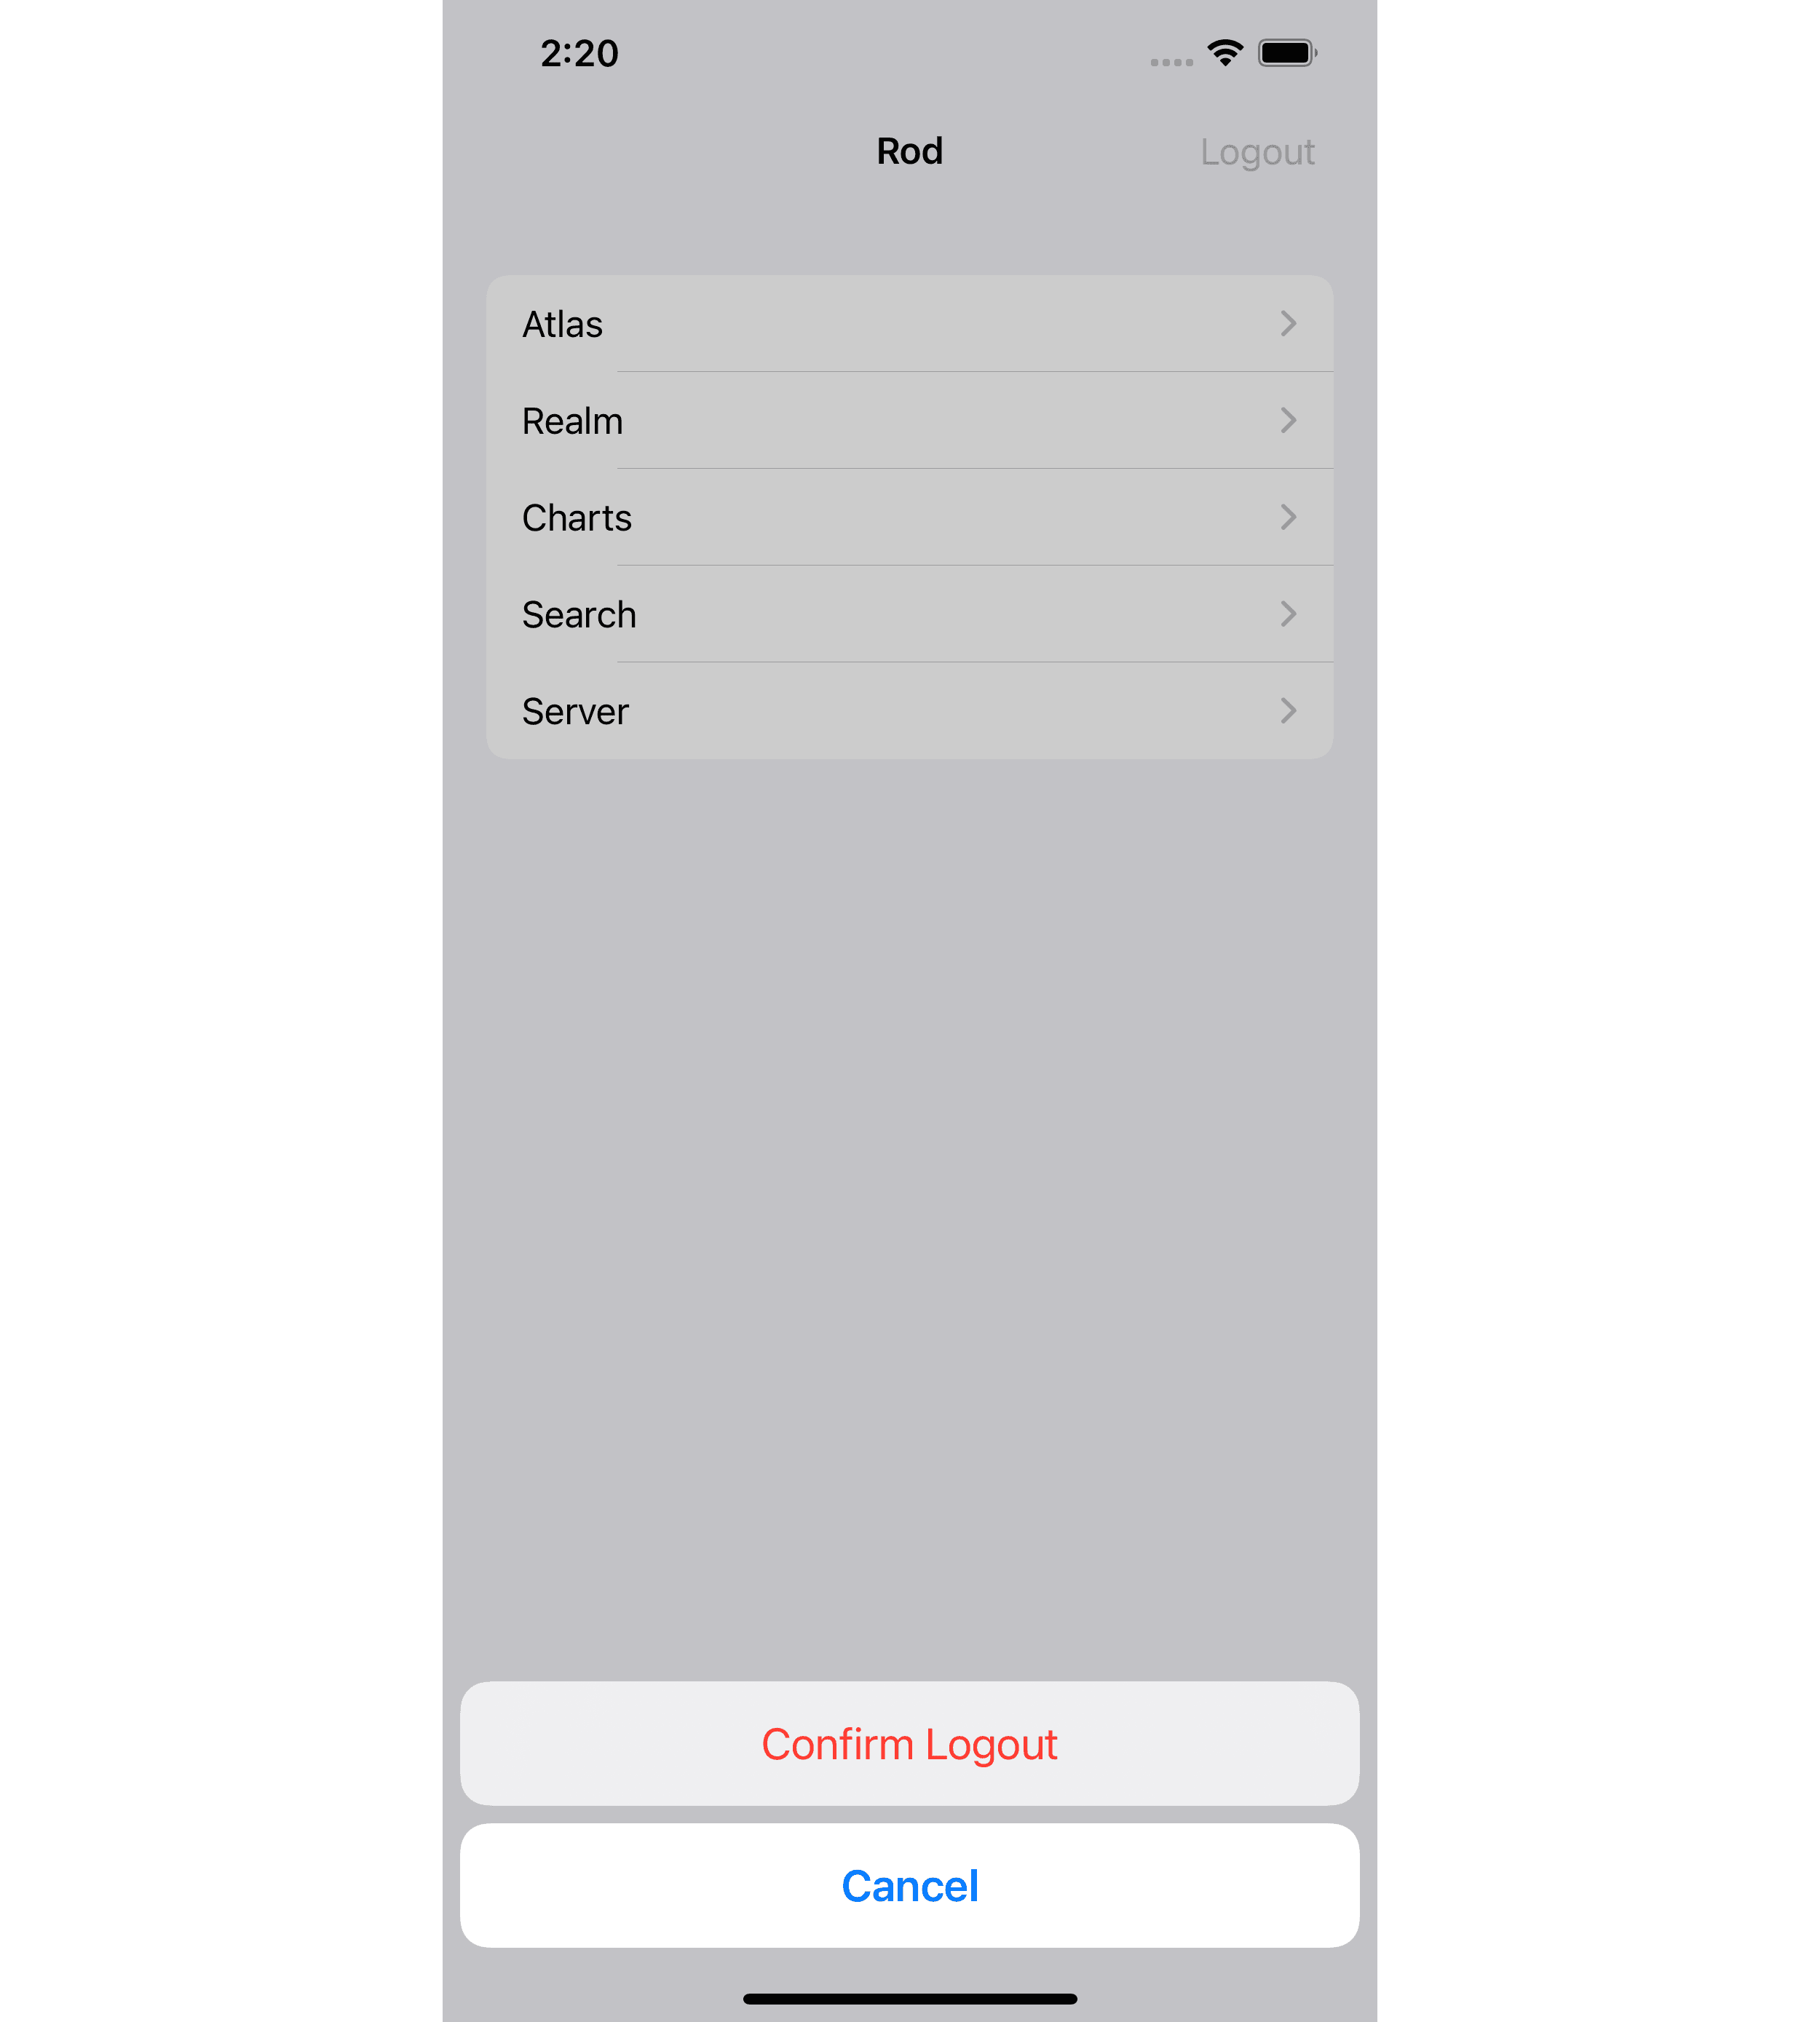 Dialog for the user to confirm that they wish to log out